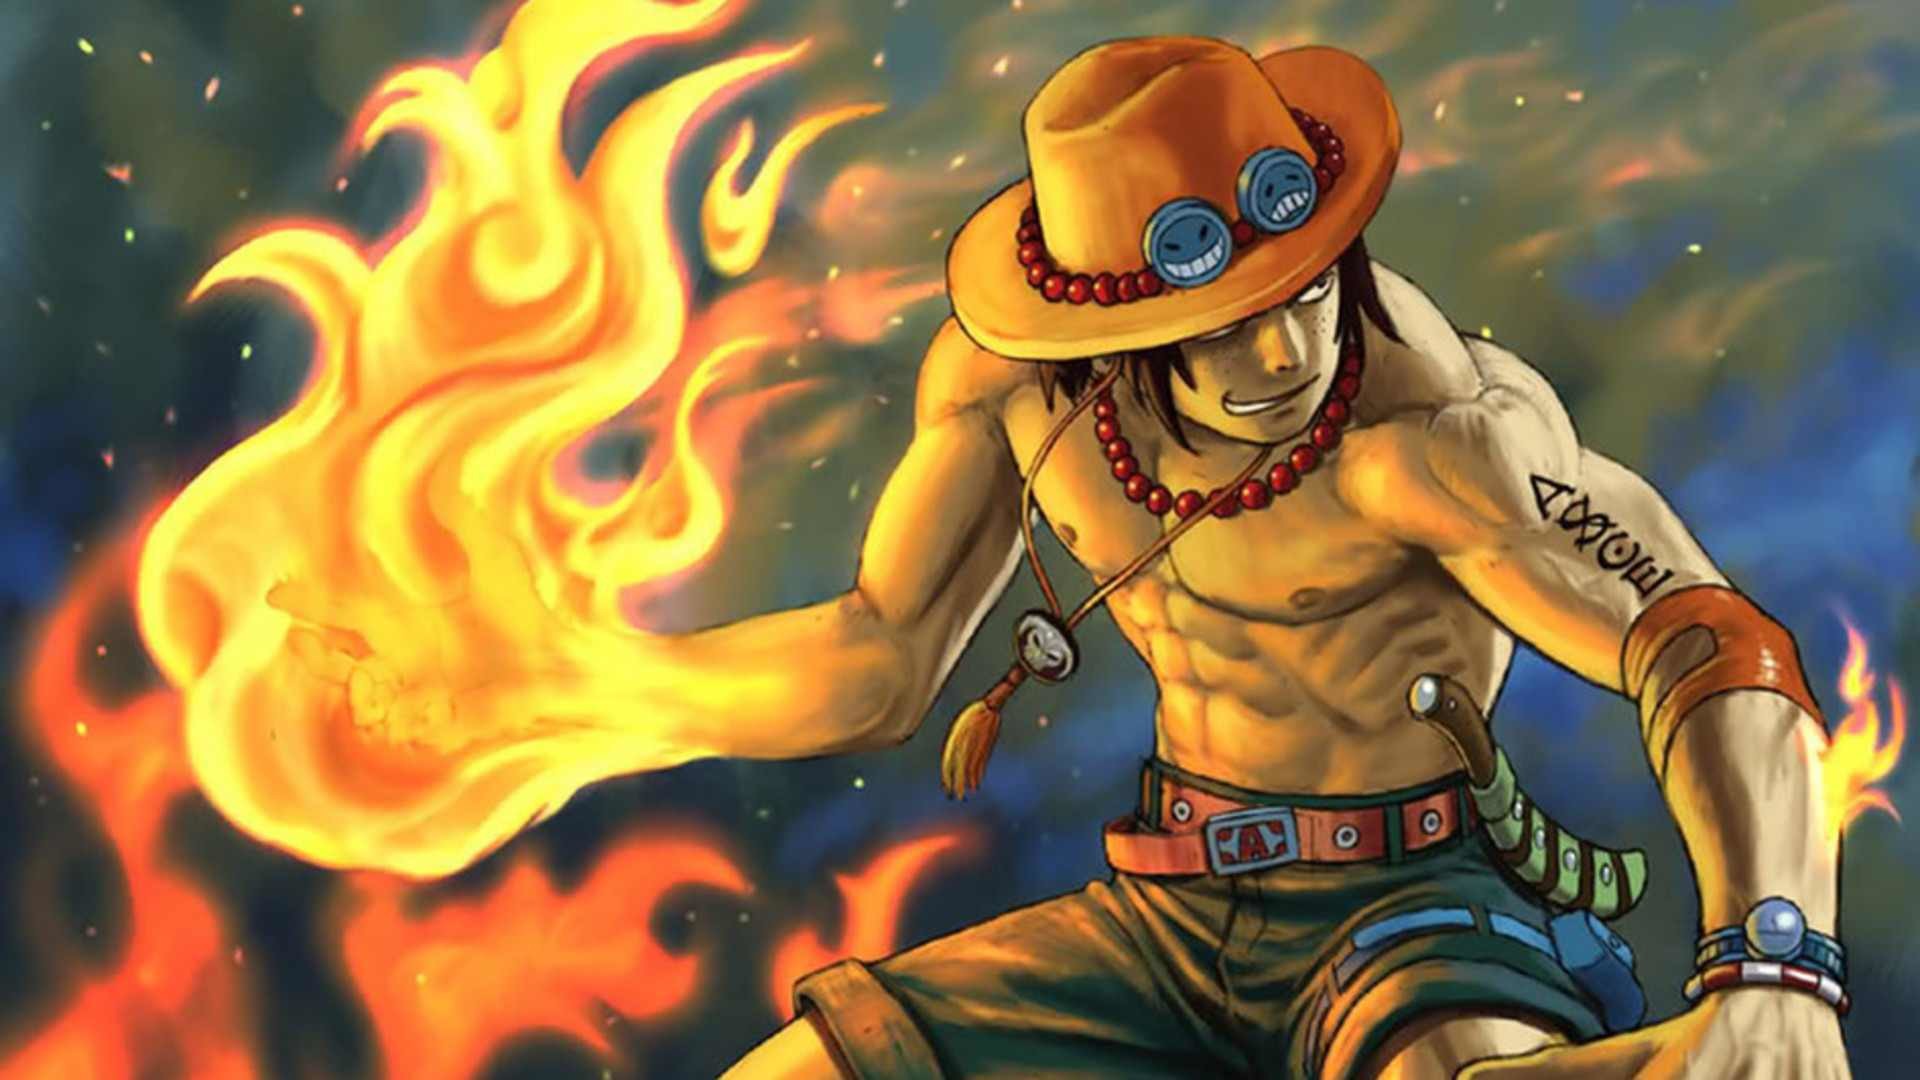 1920x1080 one piece ace wallpaper free with high resolution wallpaper on anime  category similar with after 2